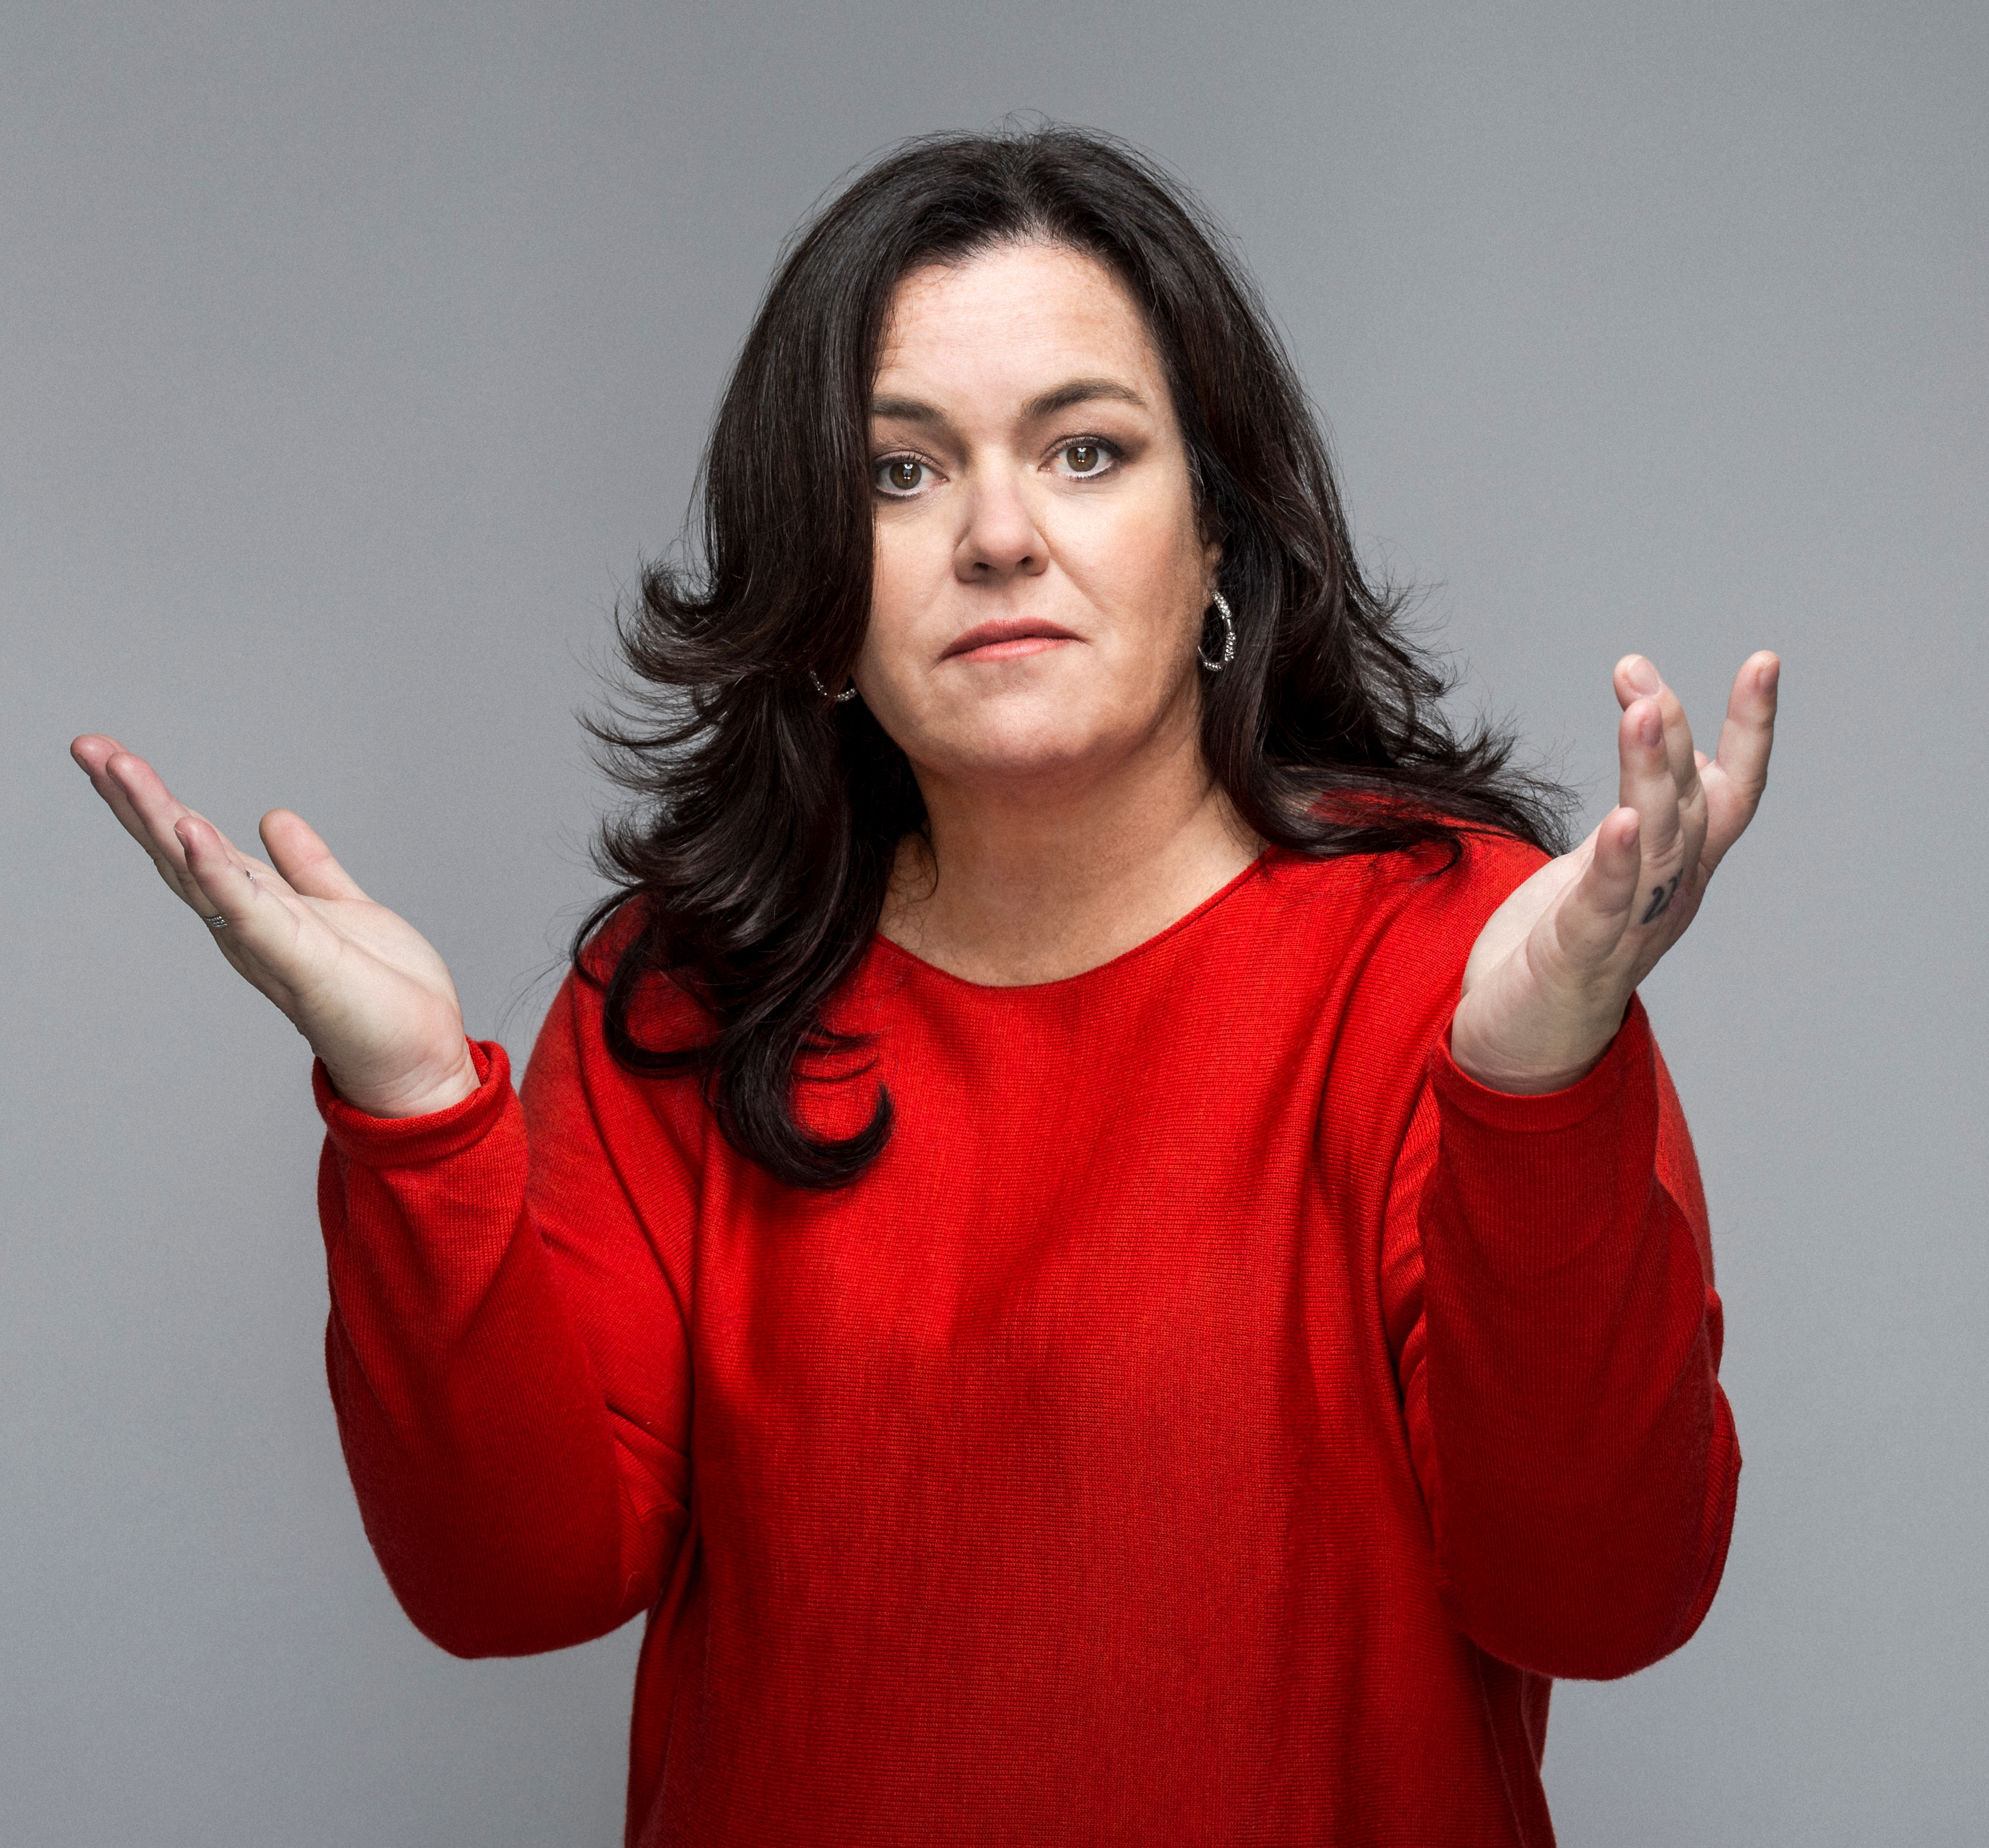 rosie-o-donnell-2016